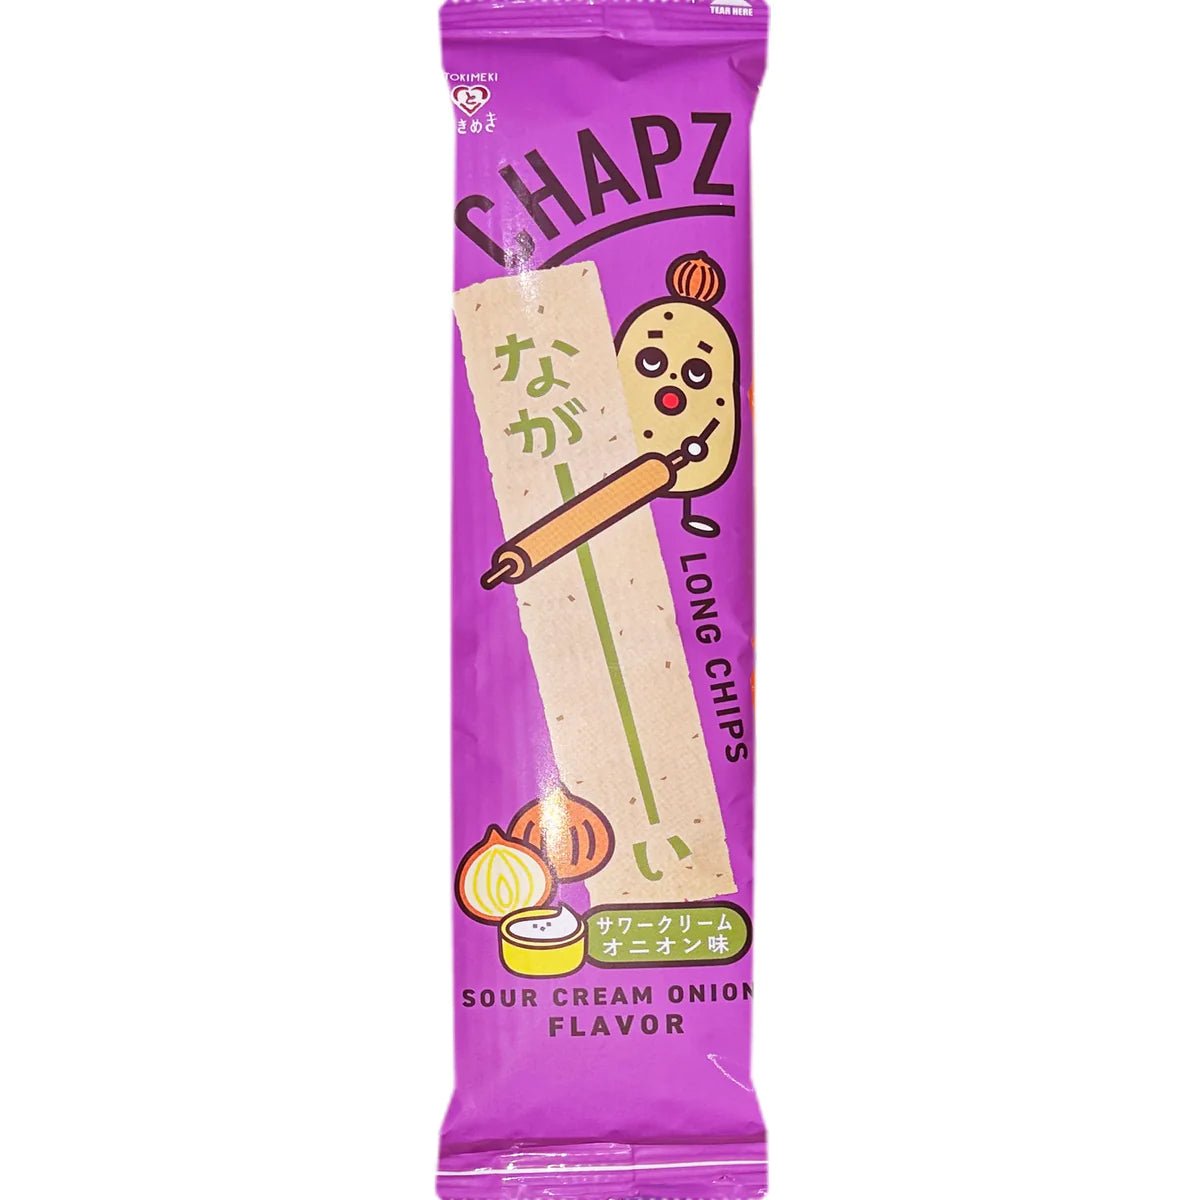 TokiMeki Chapz Long chips Sour Cream and Onion Flavour 75g - Candy Mail UK